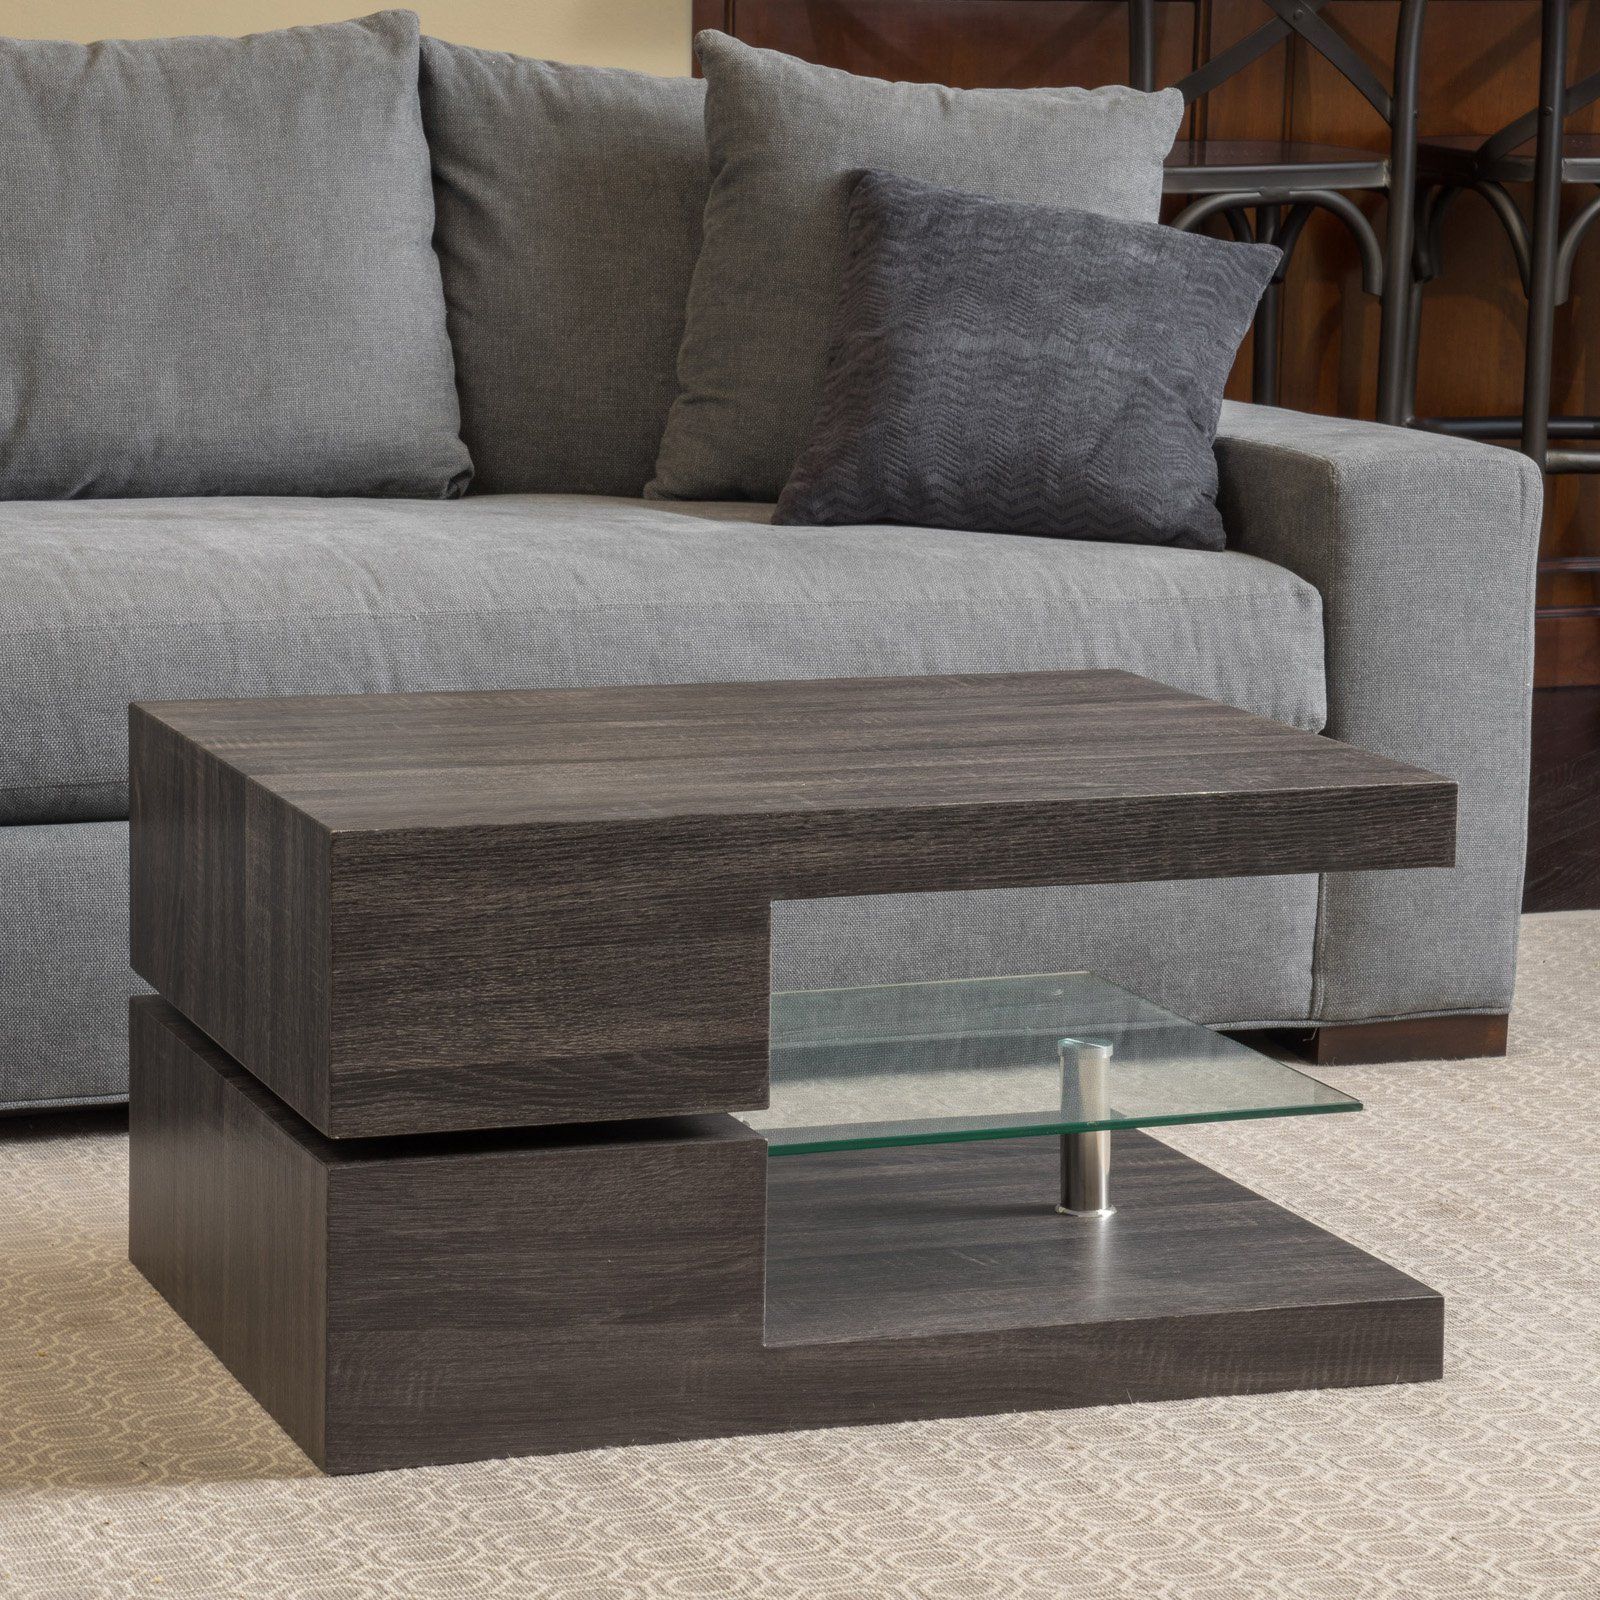 Fashionable Rectangular Glass Top Coffee Tables Intended For Small Rectangular Mod Coffee Table With Glass Shelf (Gallery 19 of 20)